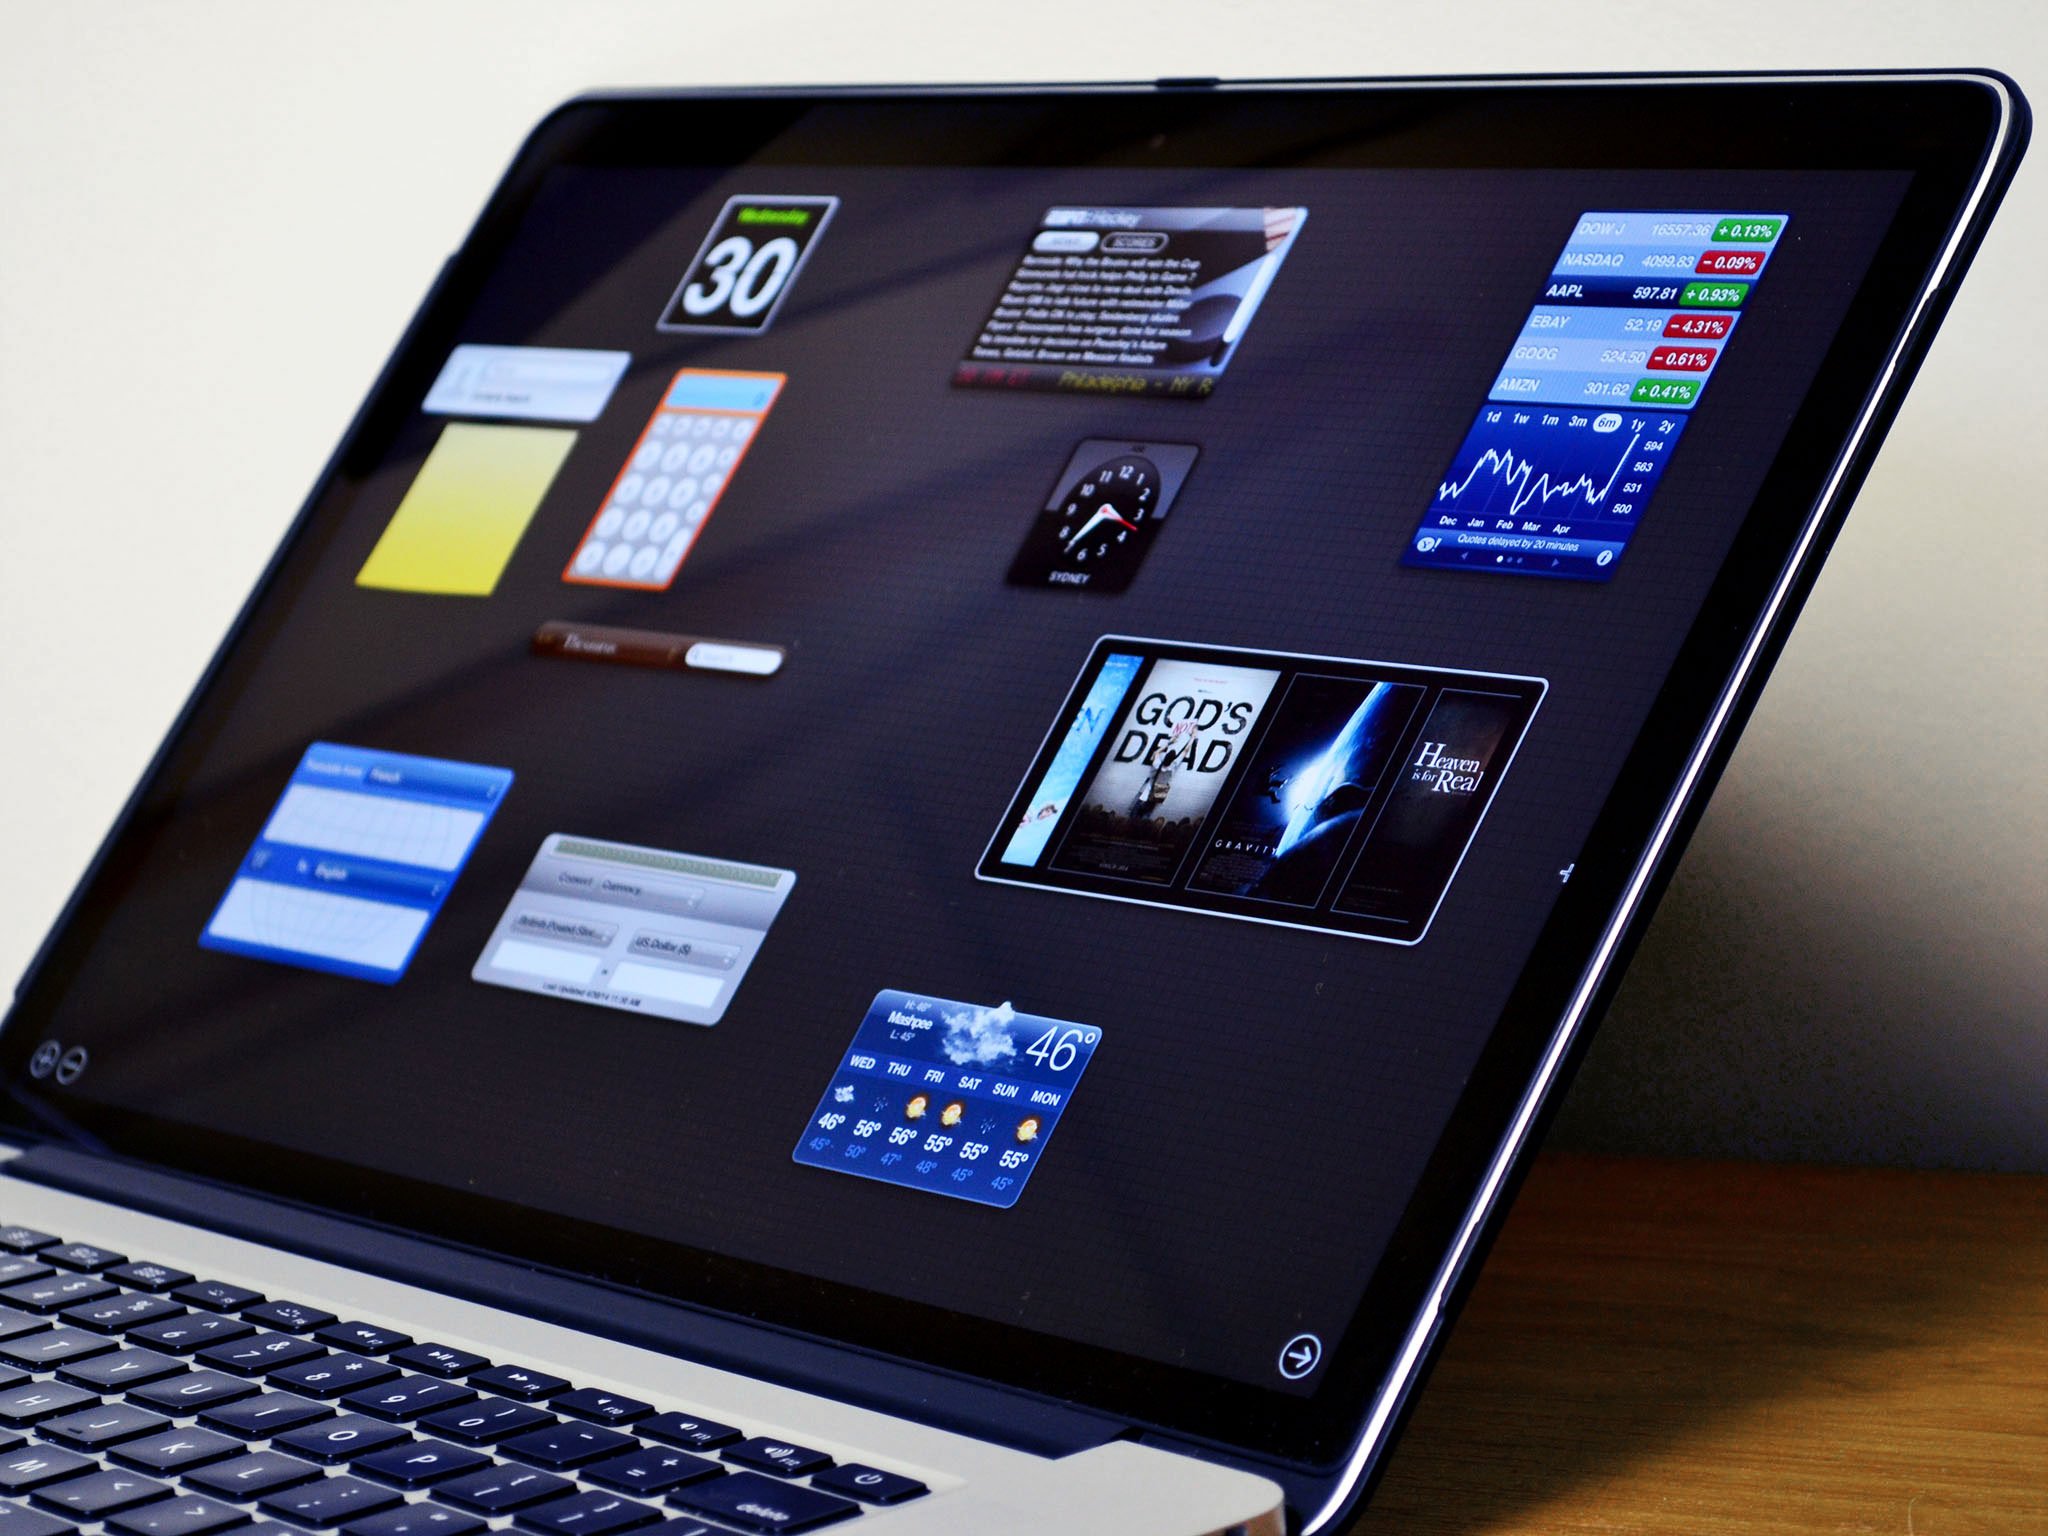 OS X Dashboard: Apple's oft-ignored widget interface - do you use it?